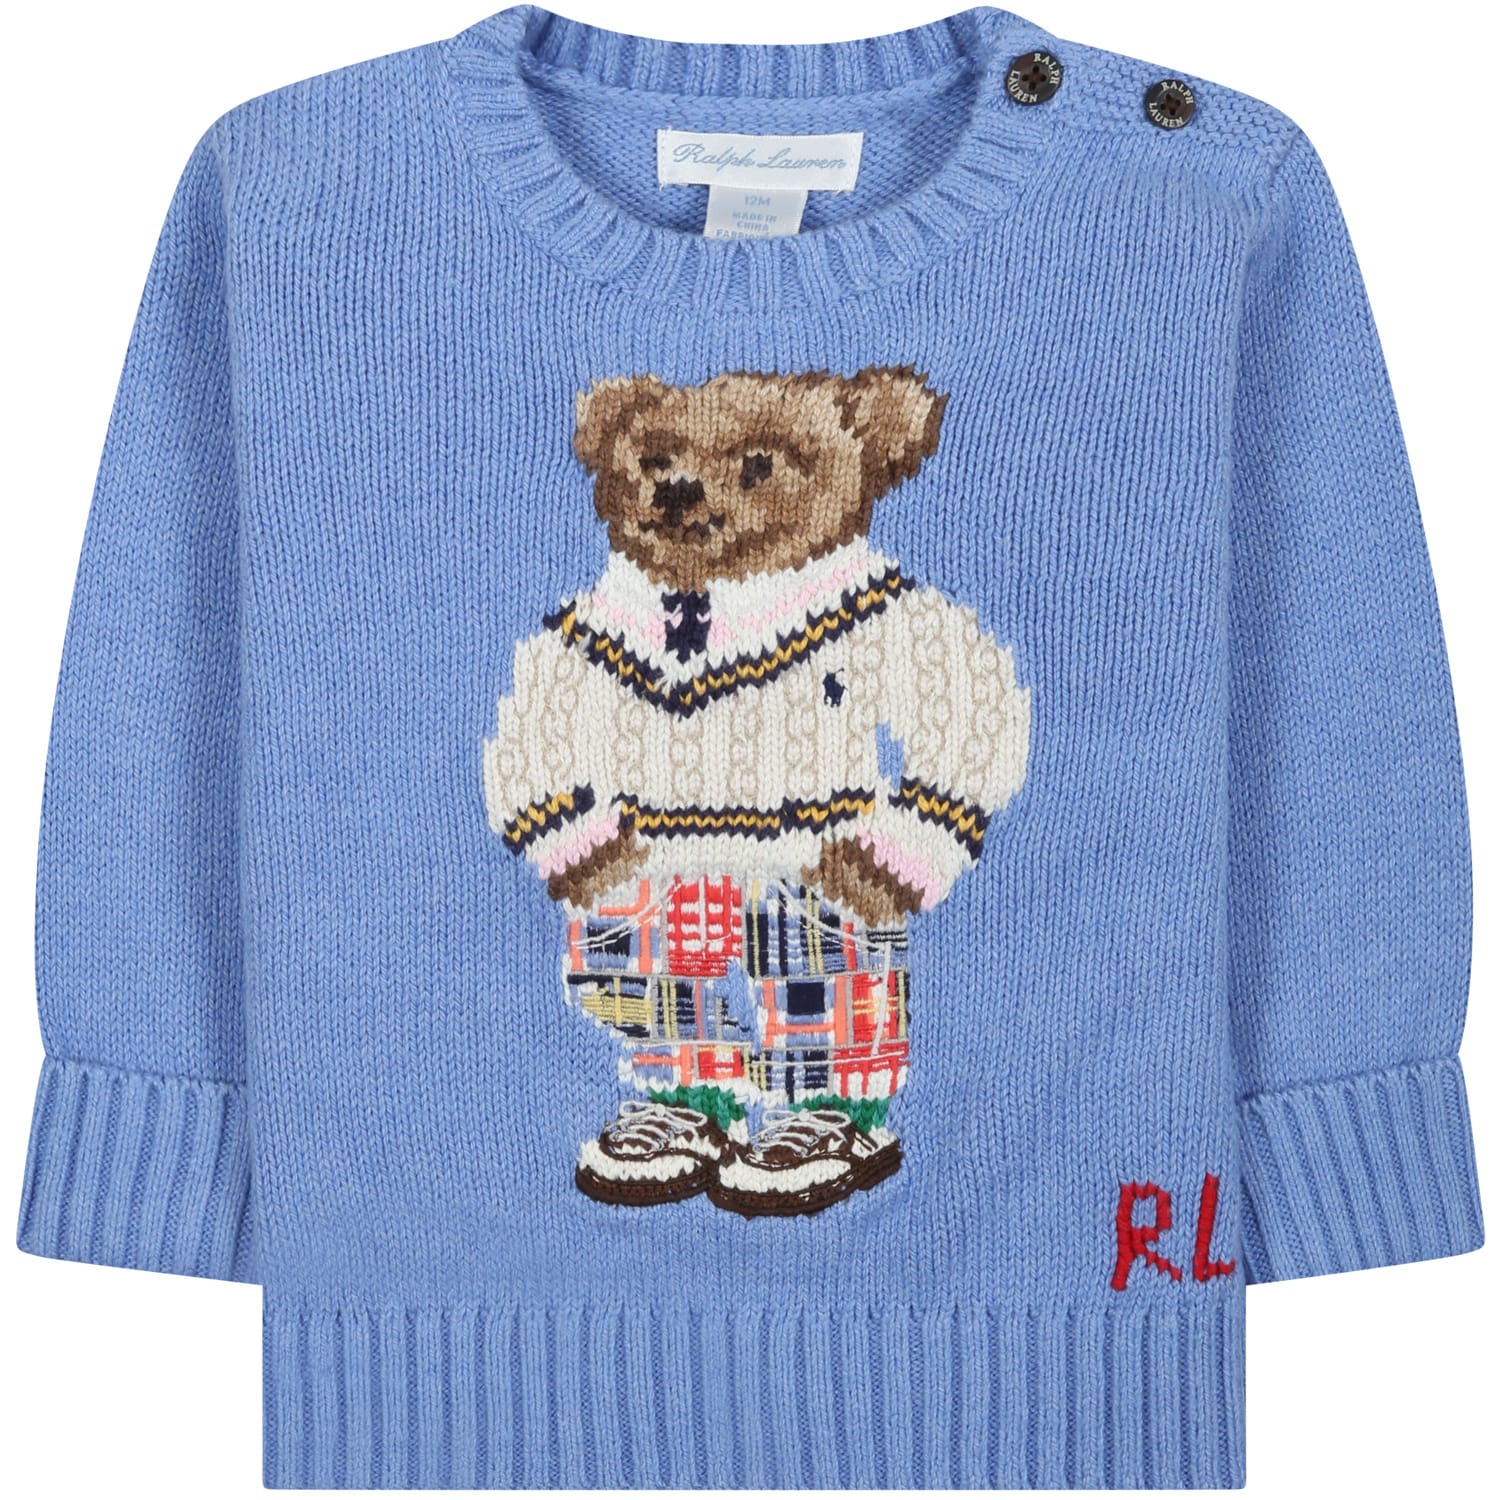 RALPH LAUREN LIGHT-BLUE SWEATER FOR BABY BOY WITH BEAR AND LOGO